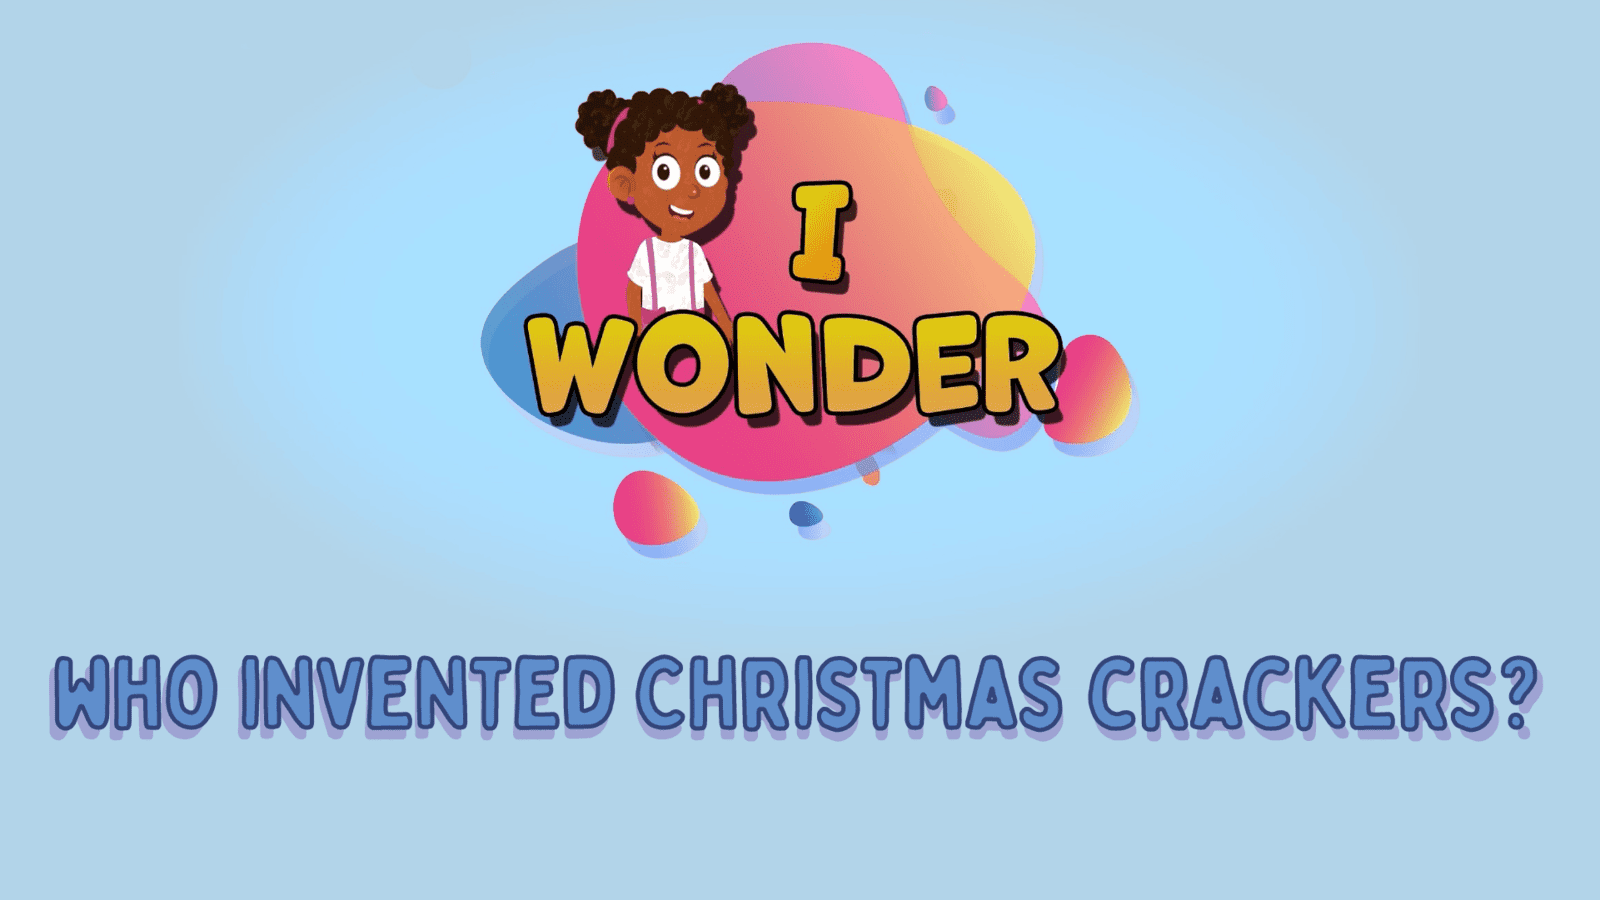 Who Invented Christmas Crackers?